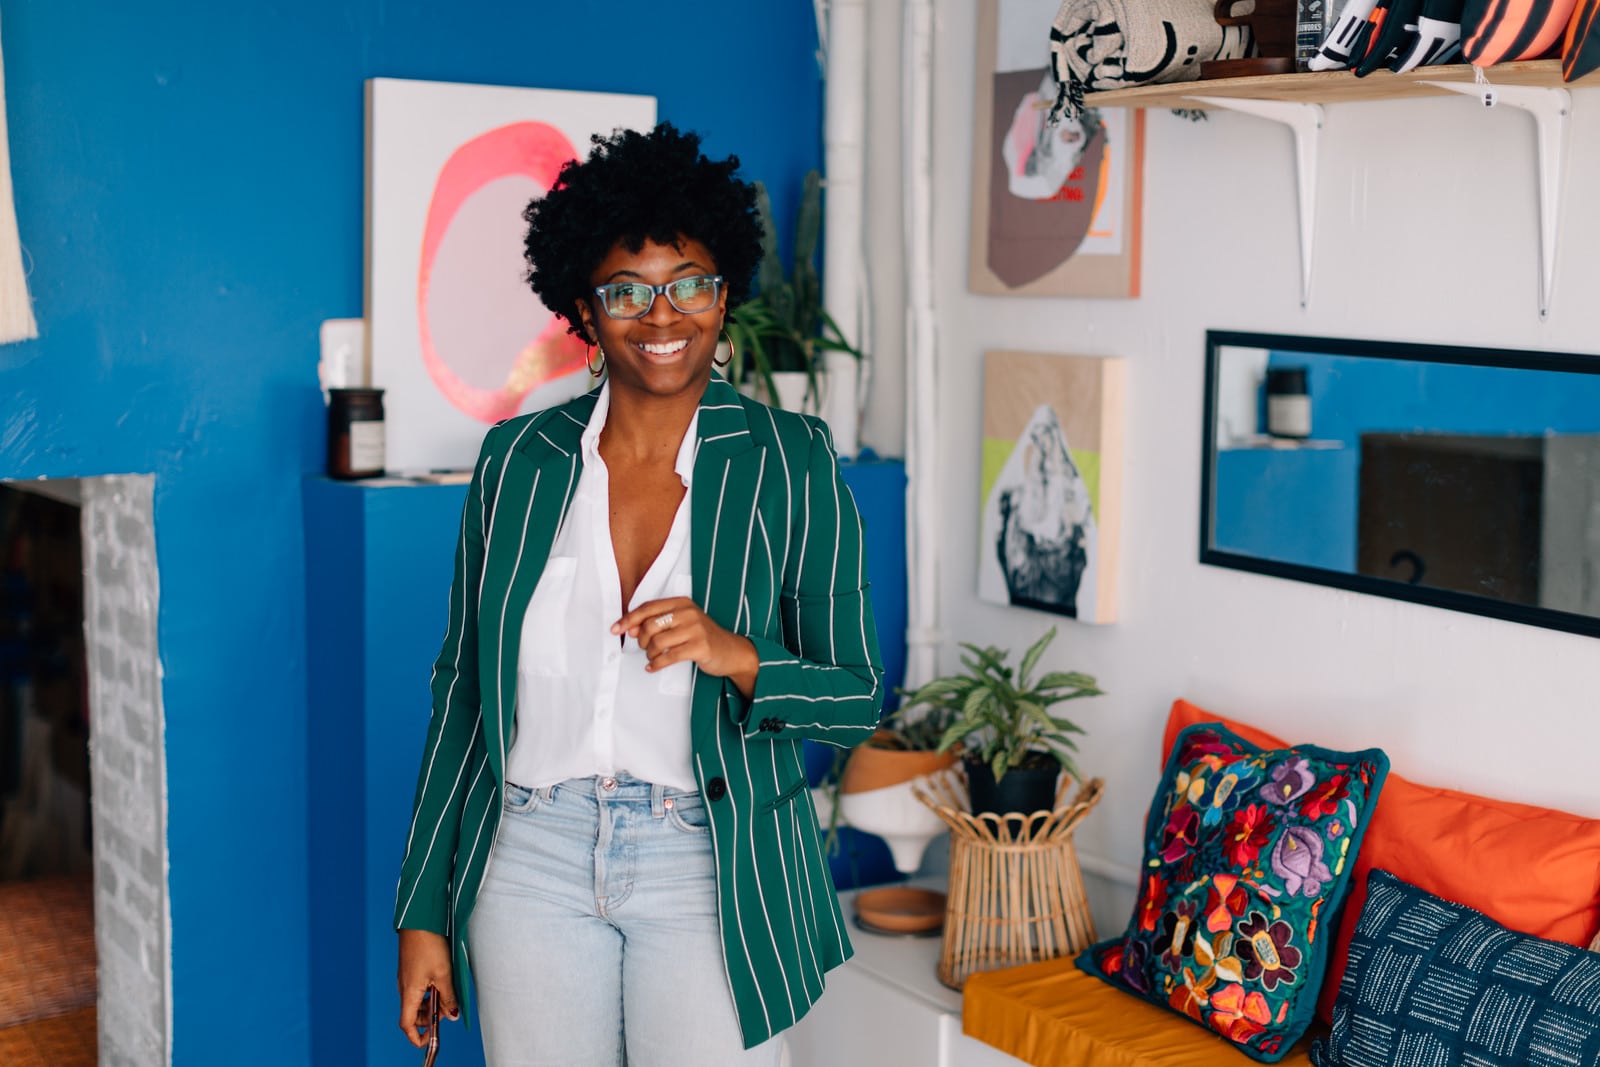 A smiling black woman standing in a confident pose, wearing a white shirt, jeans, and a green and white blazer. She is standing in front of a blue wall and orange couch.